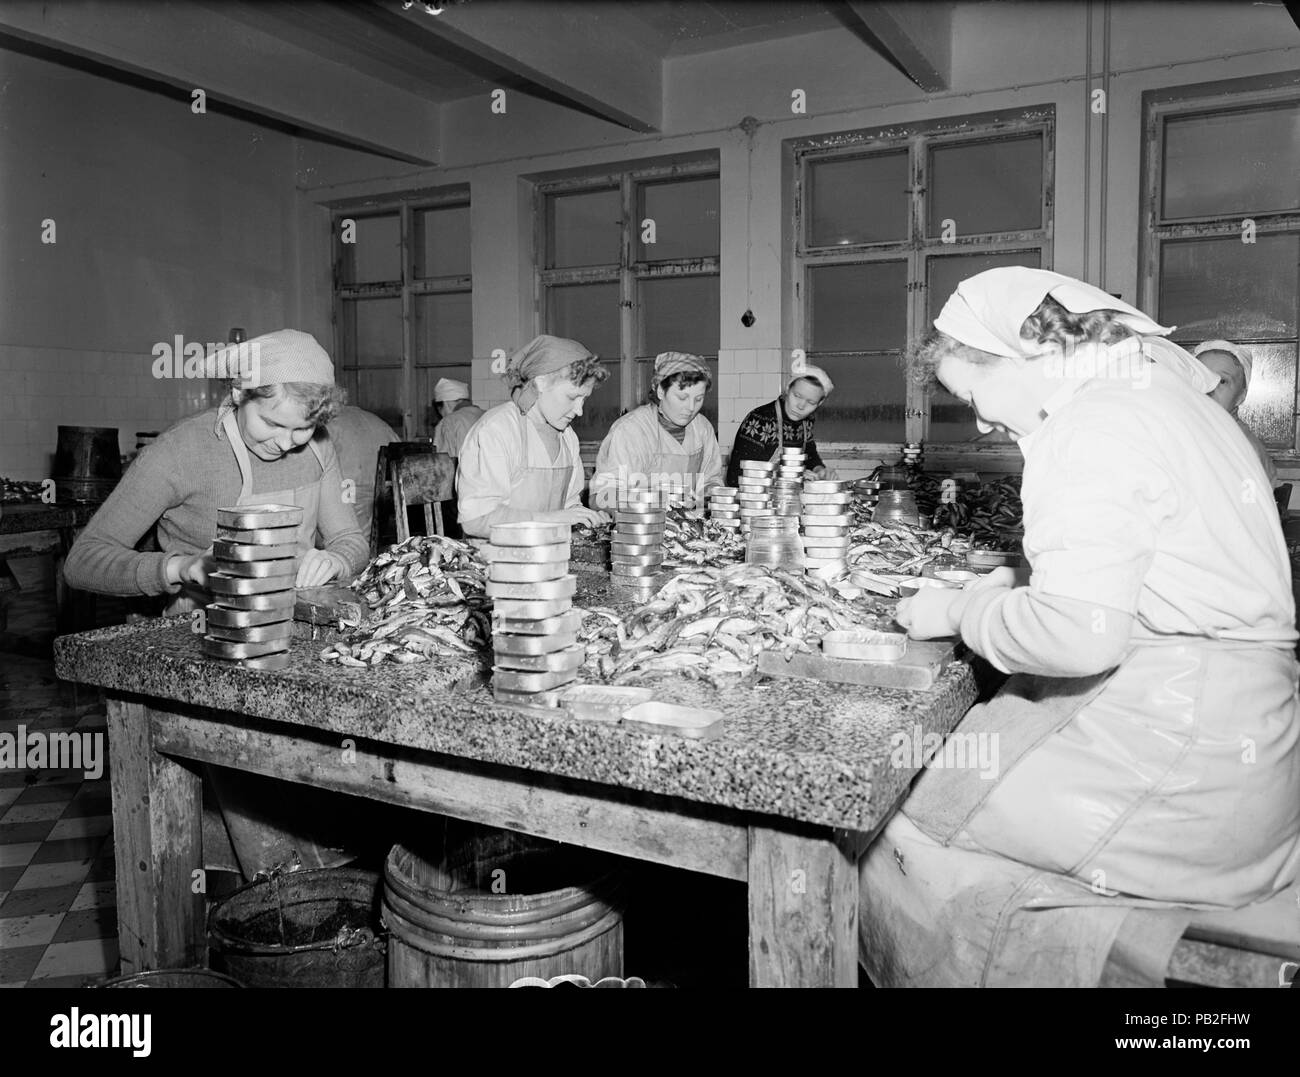 Female workers sitting at table packing tins, Suomen Kalastus Oy's canned fish factory, Loviisa, Uusimaa, Finland undated 1930s-1950s Stock Photo